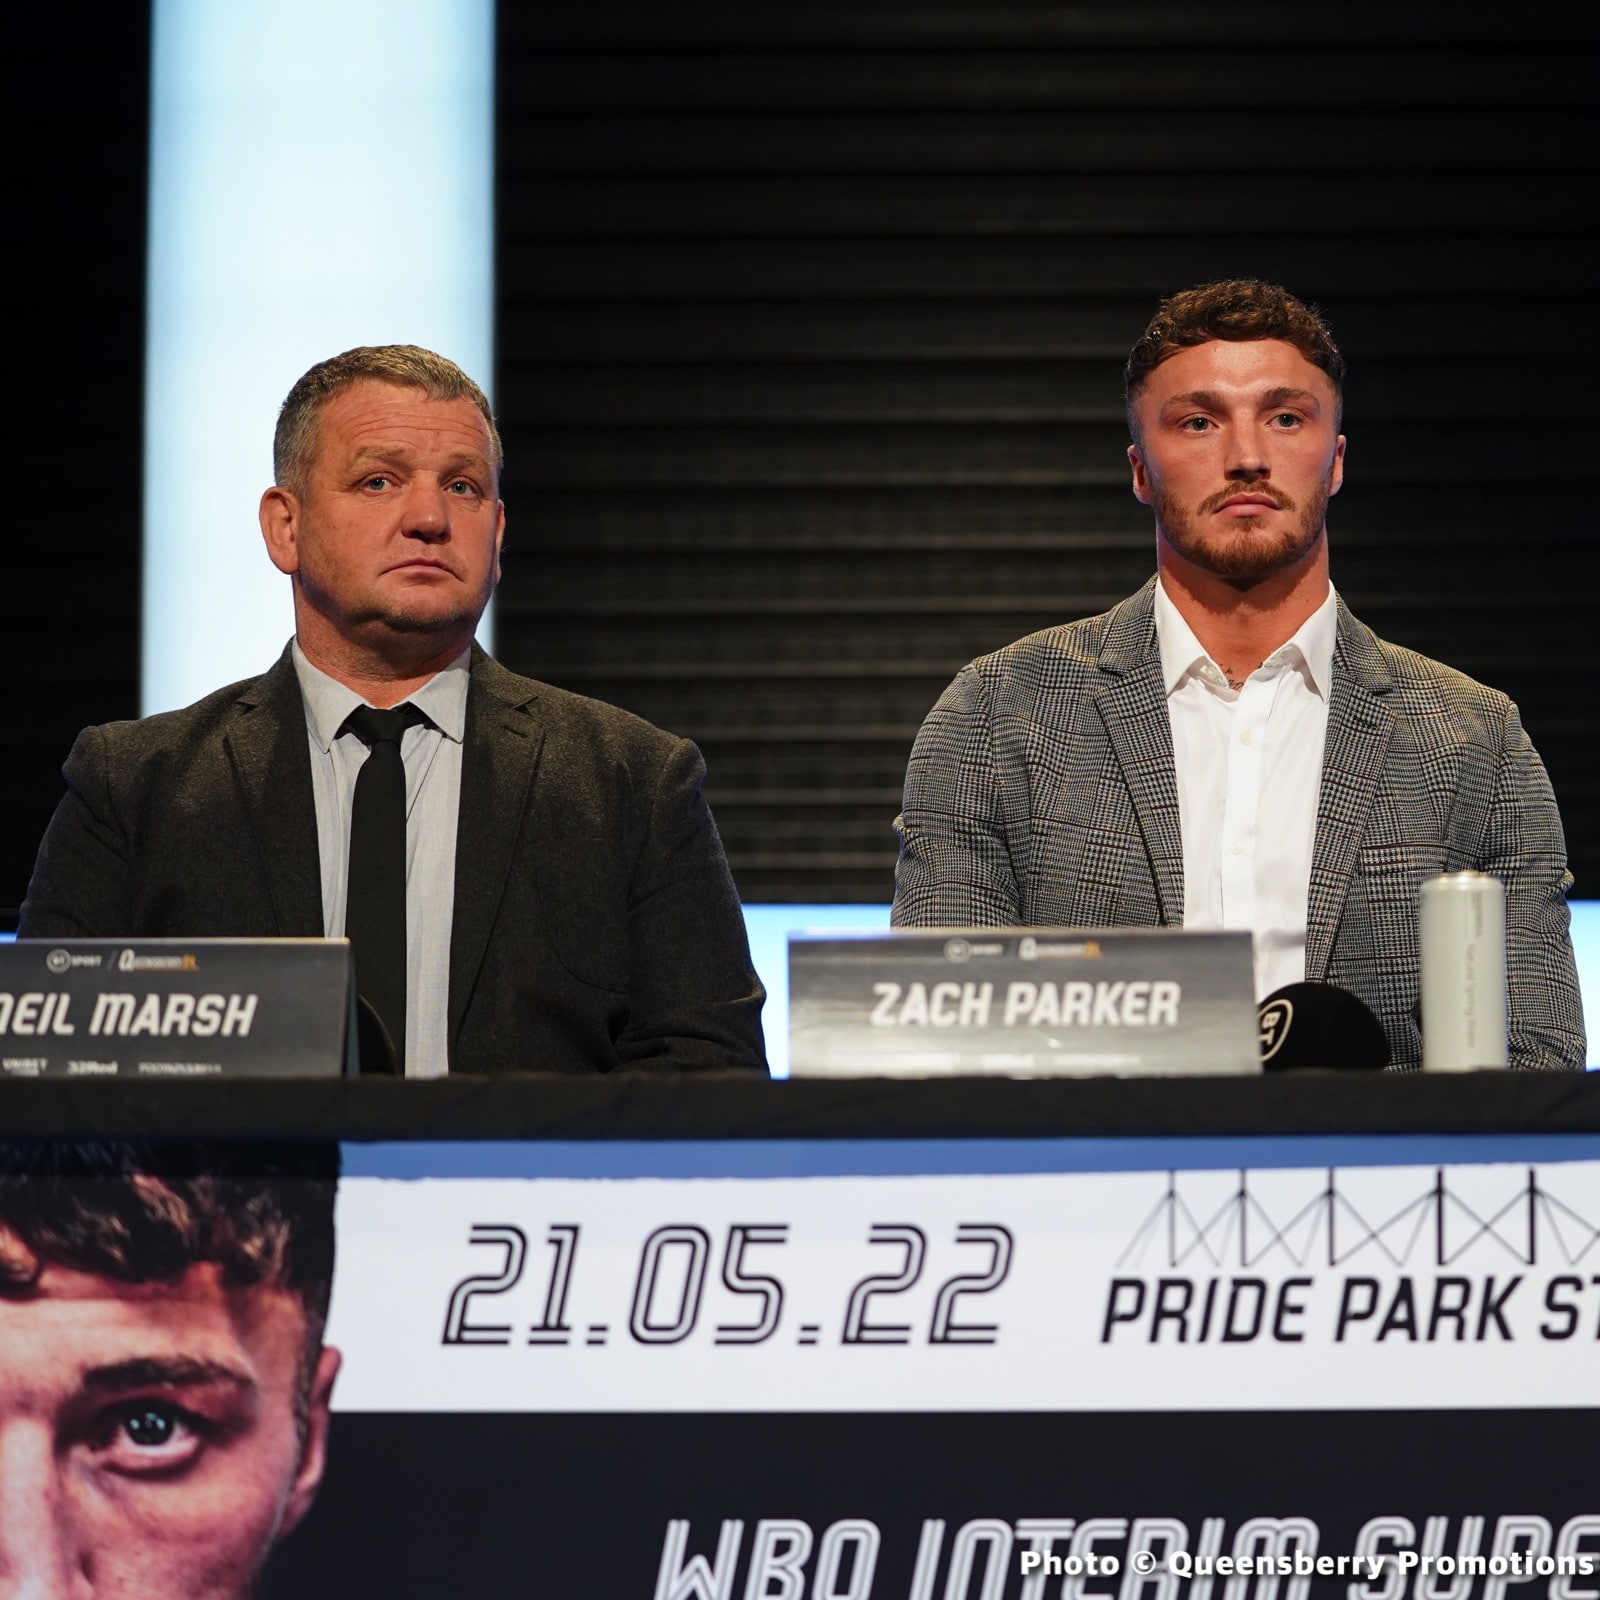 Image: Andrade vs. Parker quotes & photos - press conference